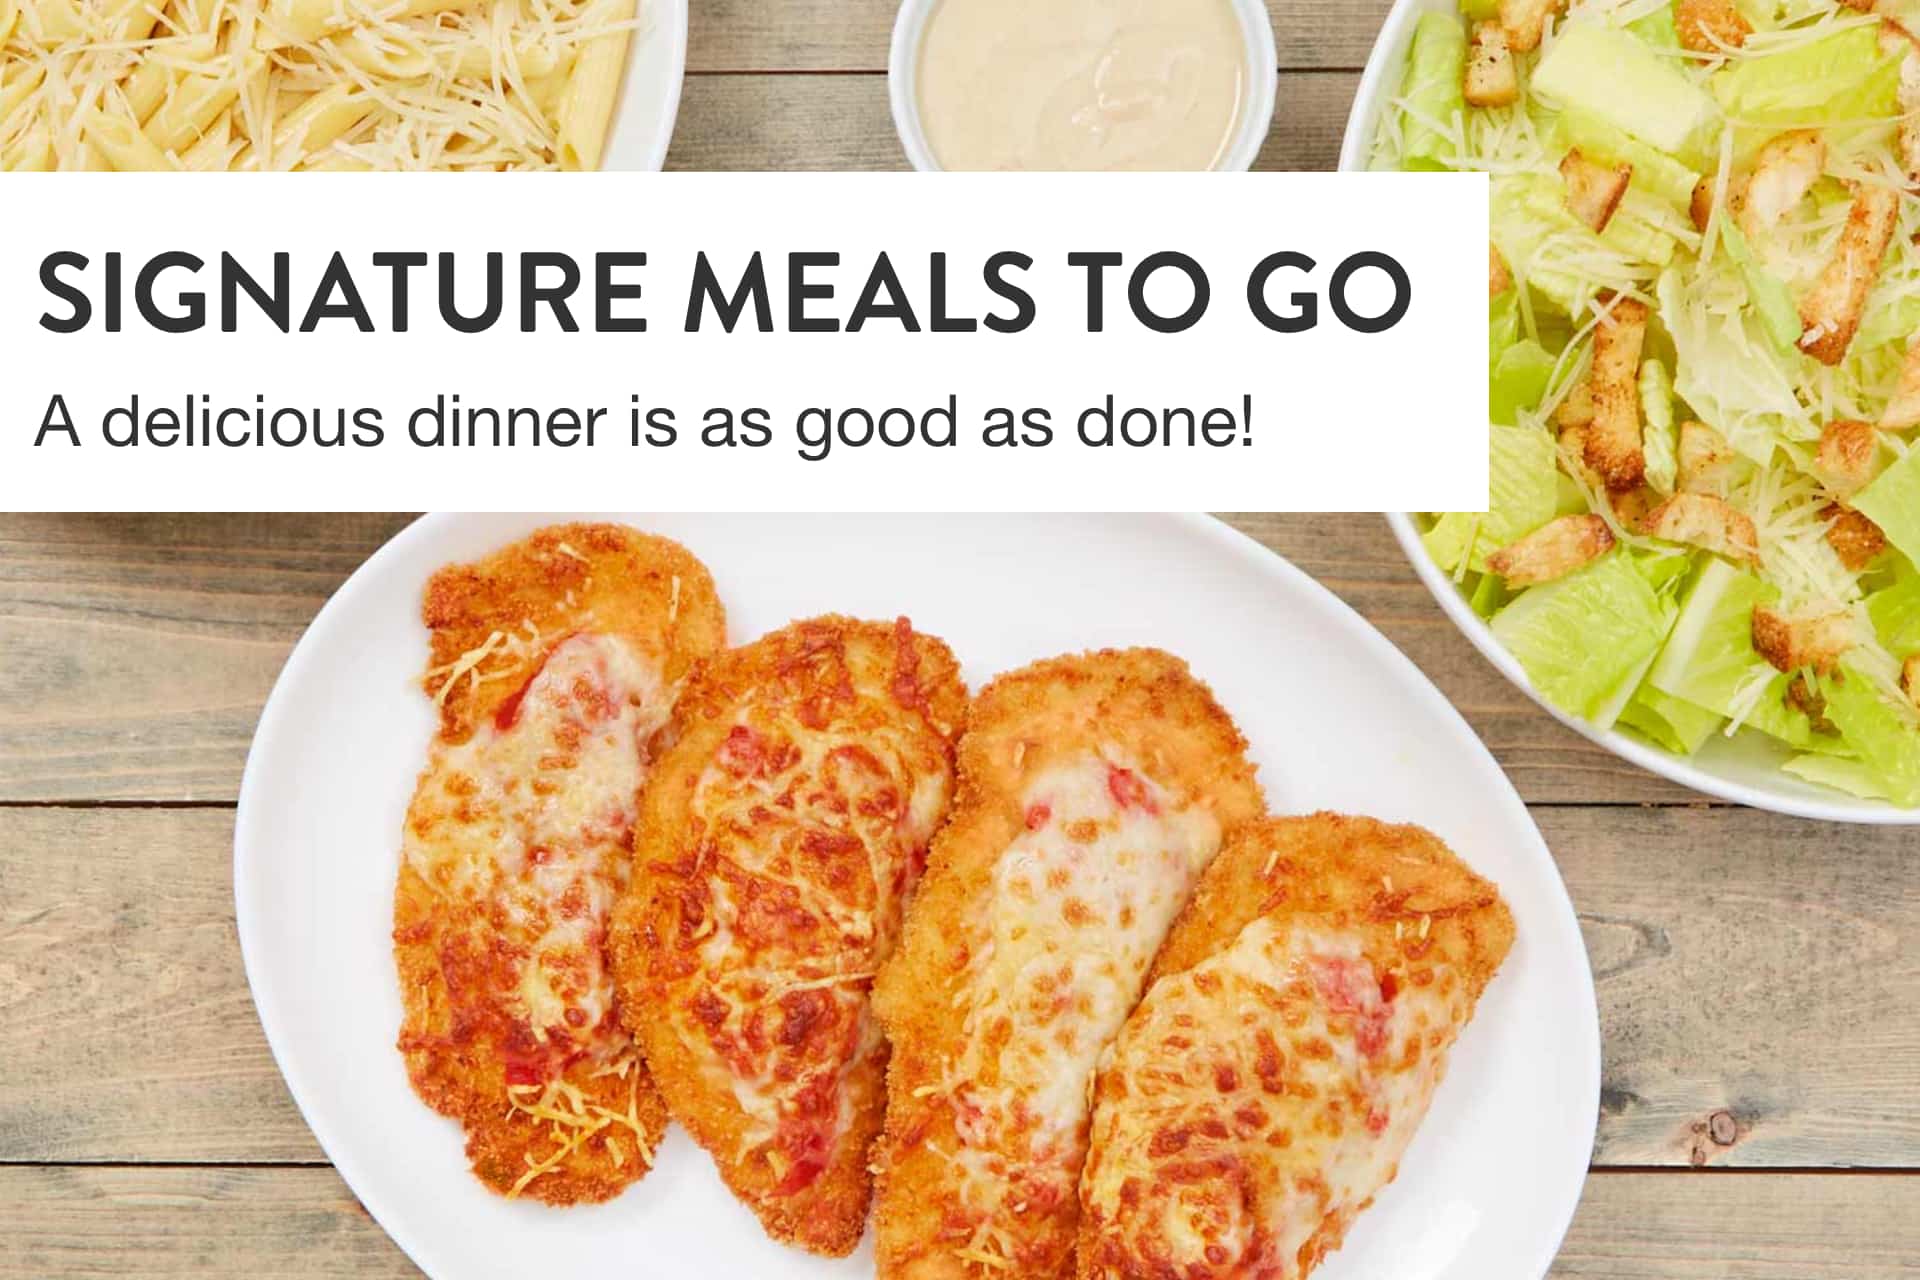 Signature Meals to Go - A delicious dinner is as good as done!